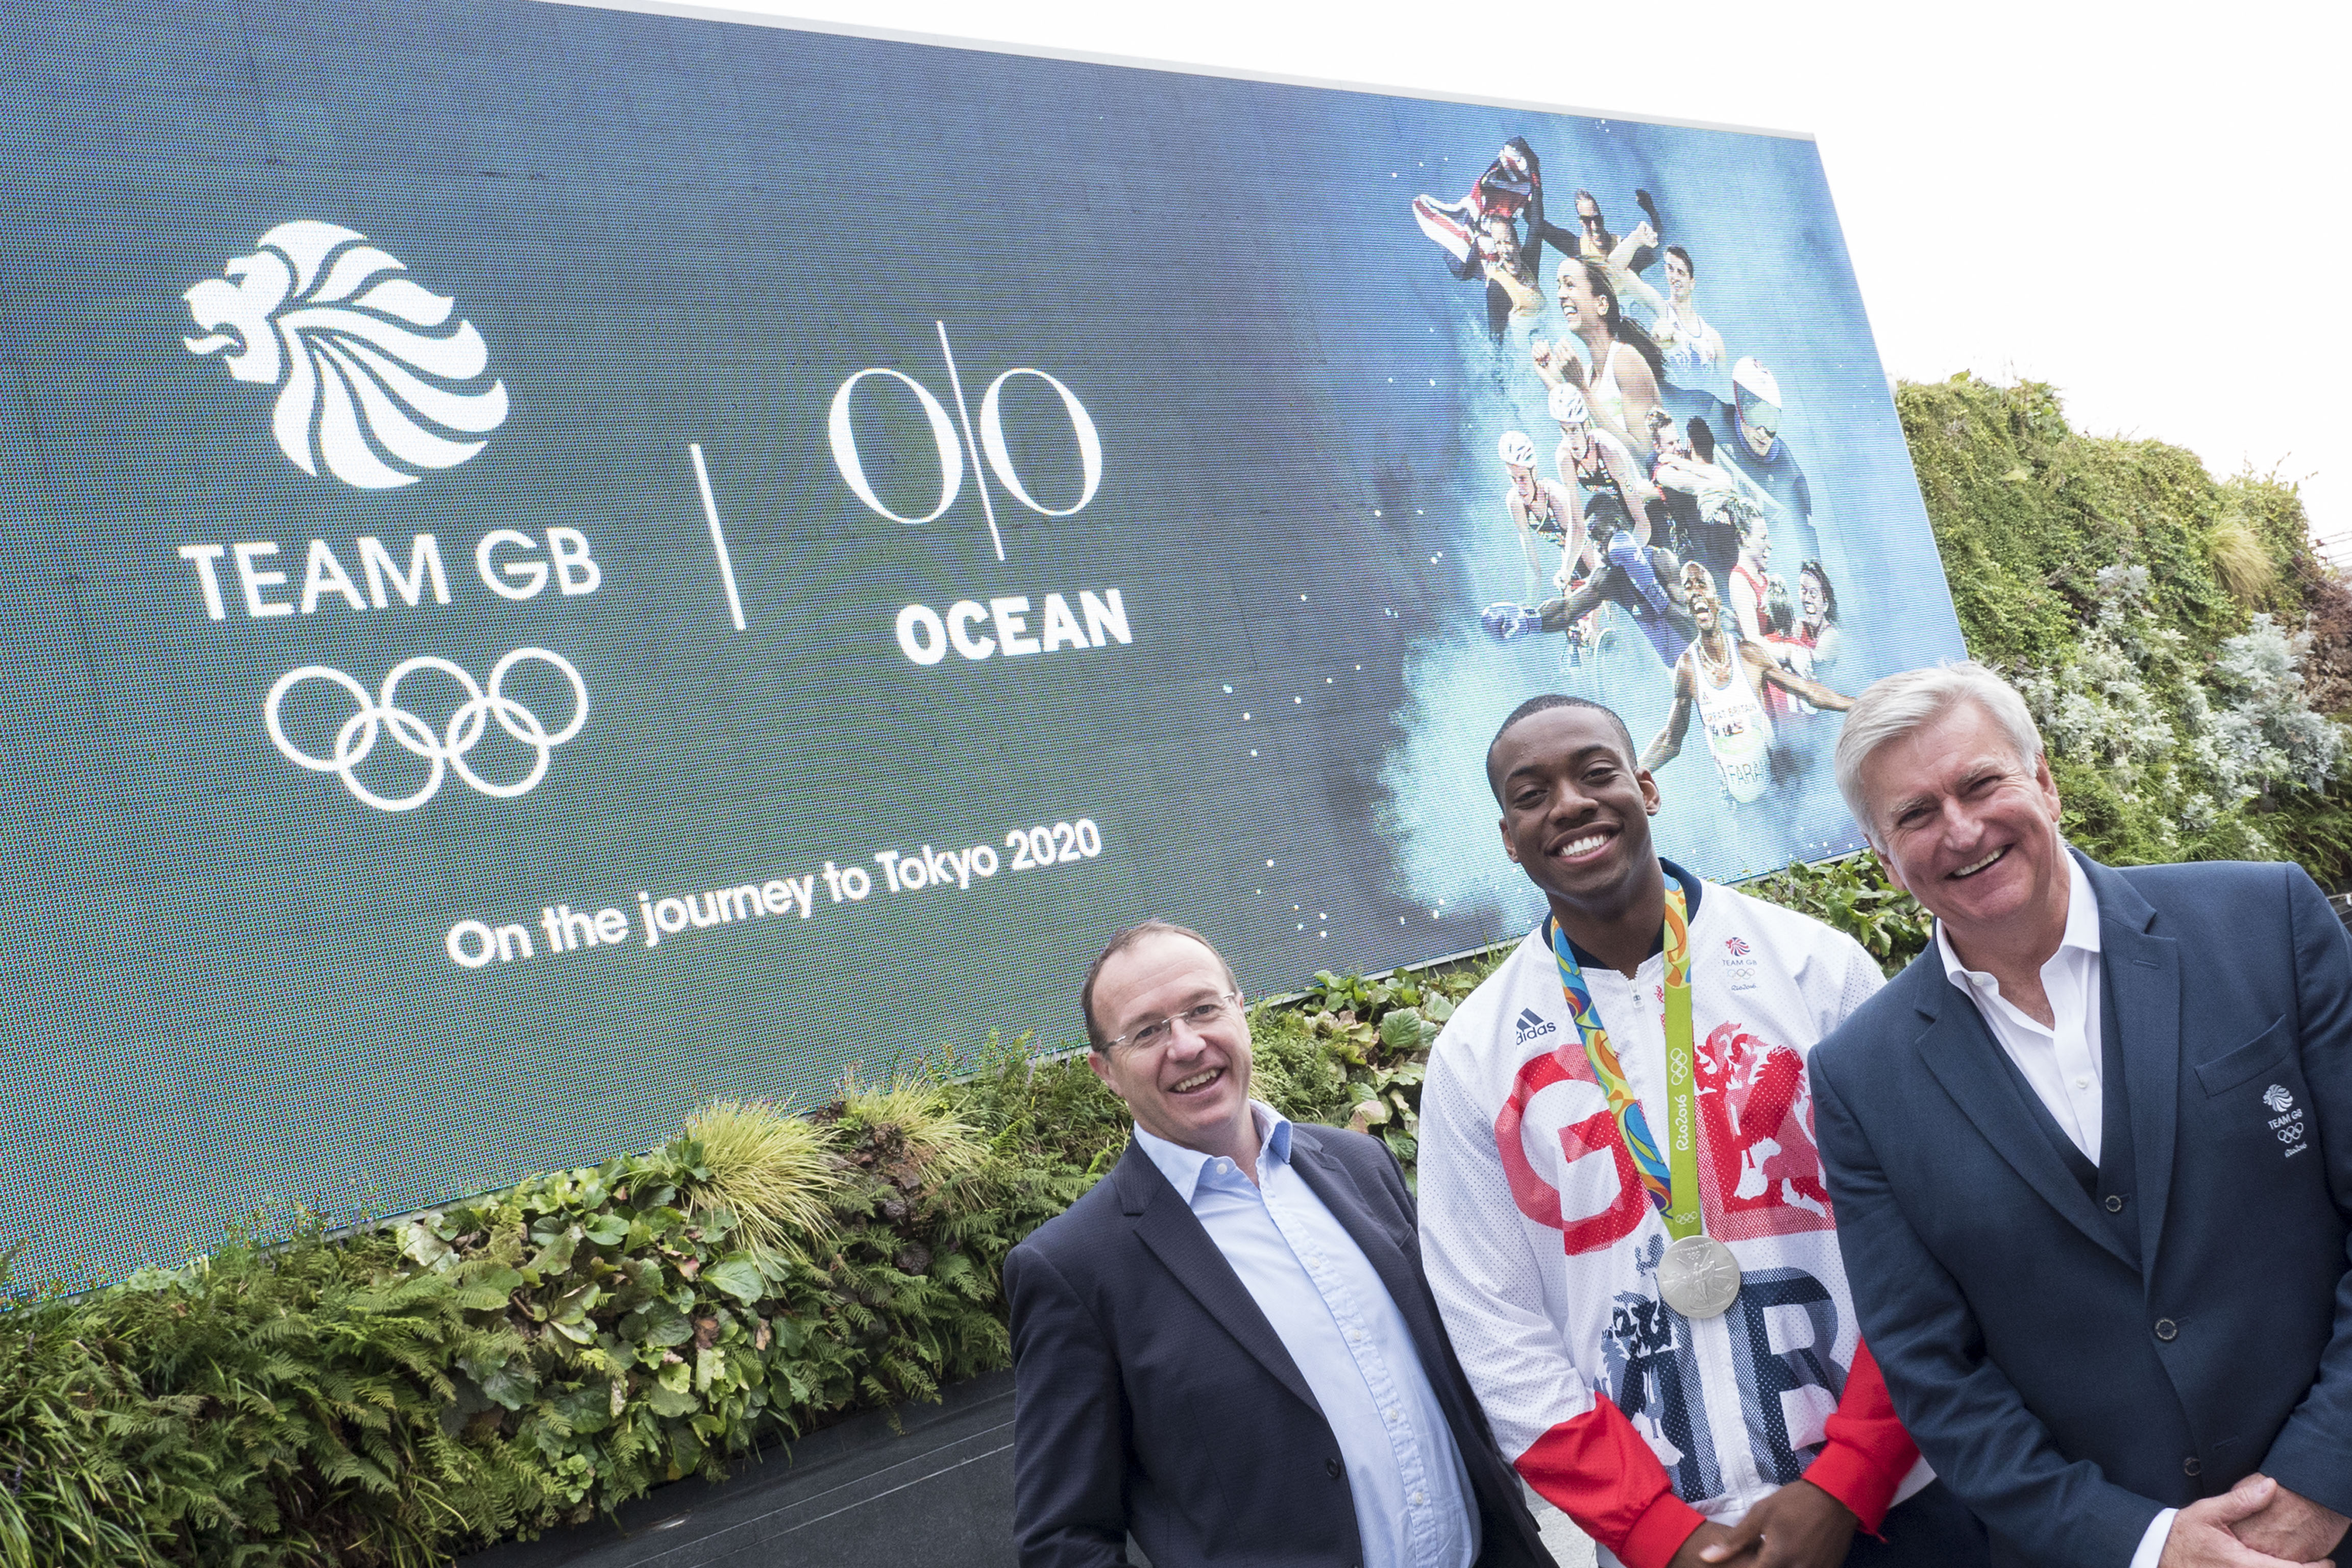 Team GB and Ocean Extend Their Exclusive Partnership to the Tokyo Olympic Games in 2020